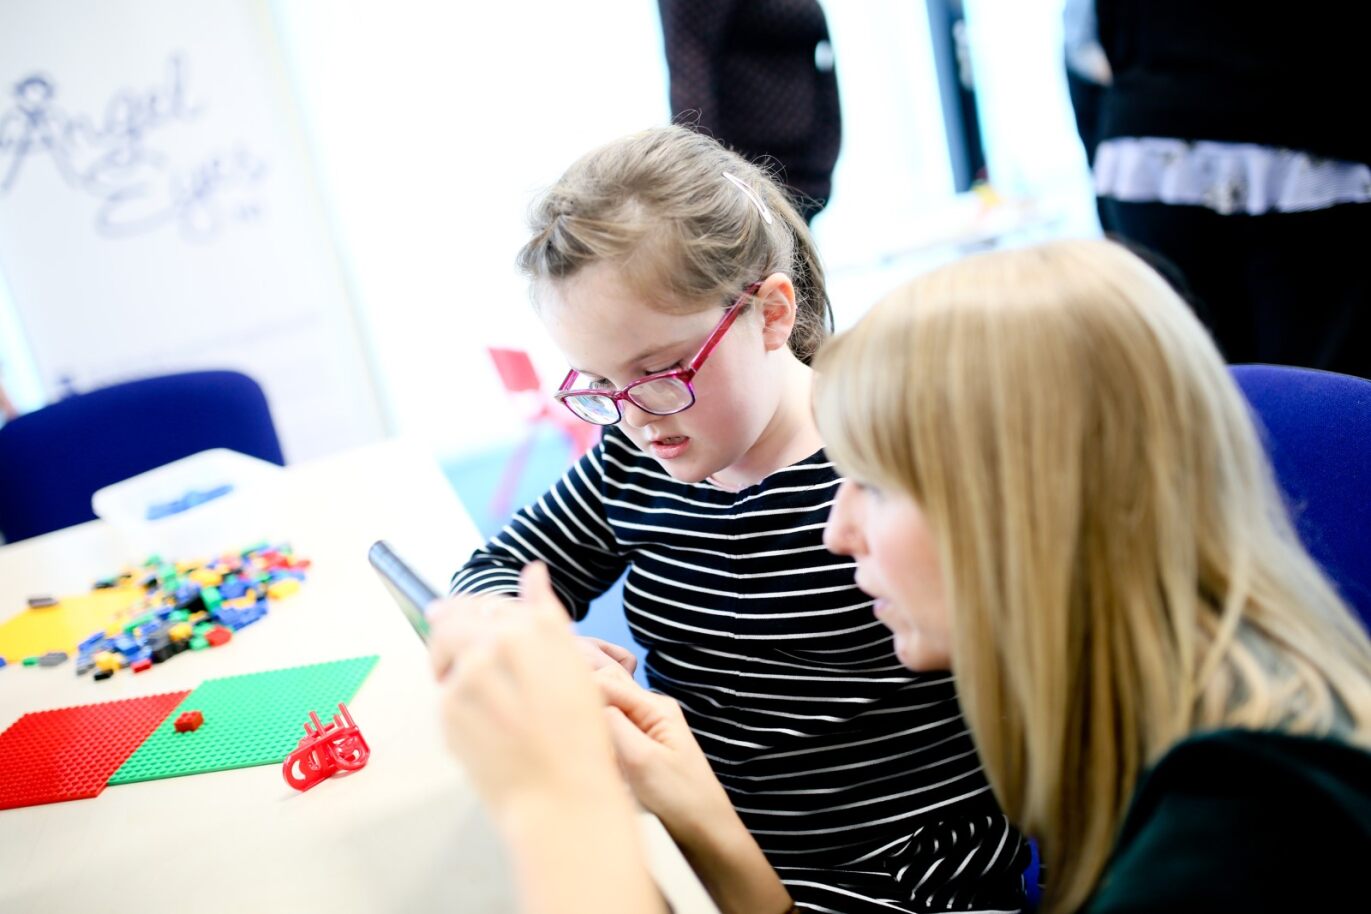 This image shows a young girl being taught how to use the accessibility features of the iPad by our Education Advocate at an Accessibility workshop.